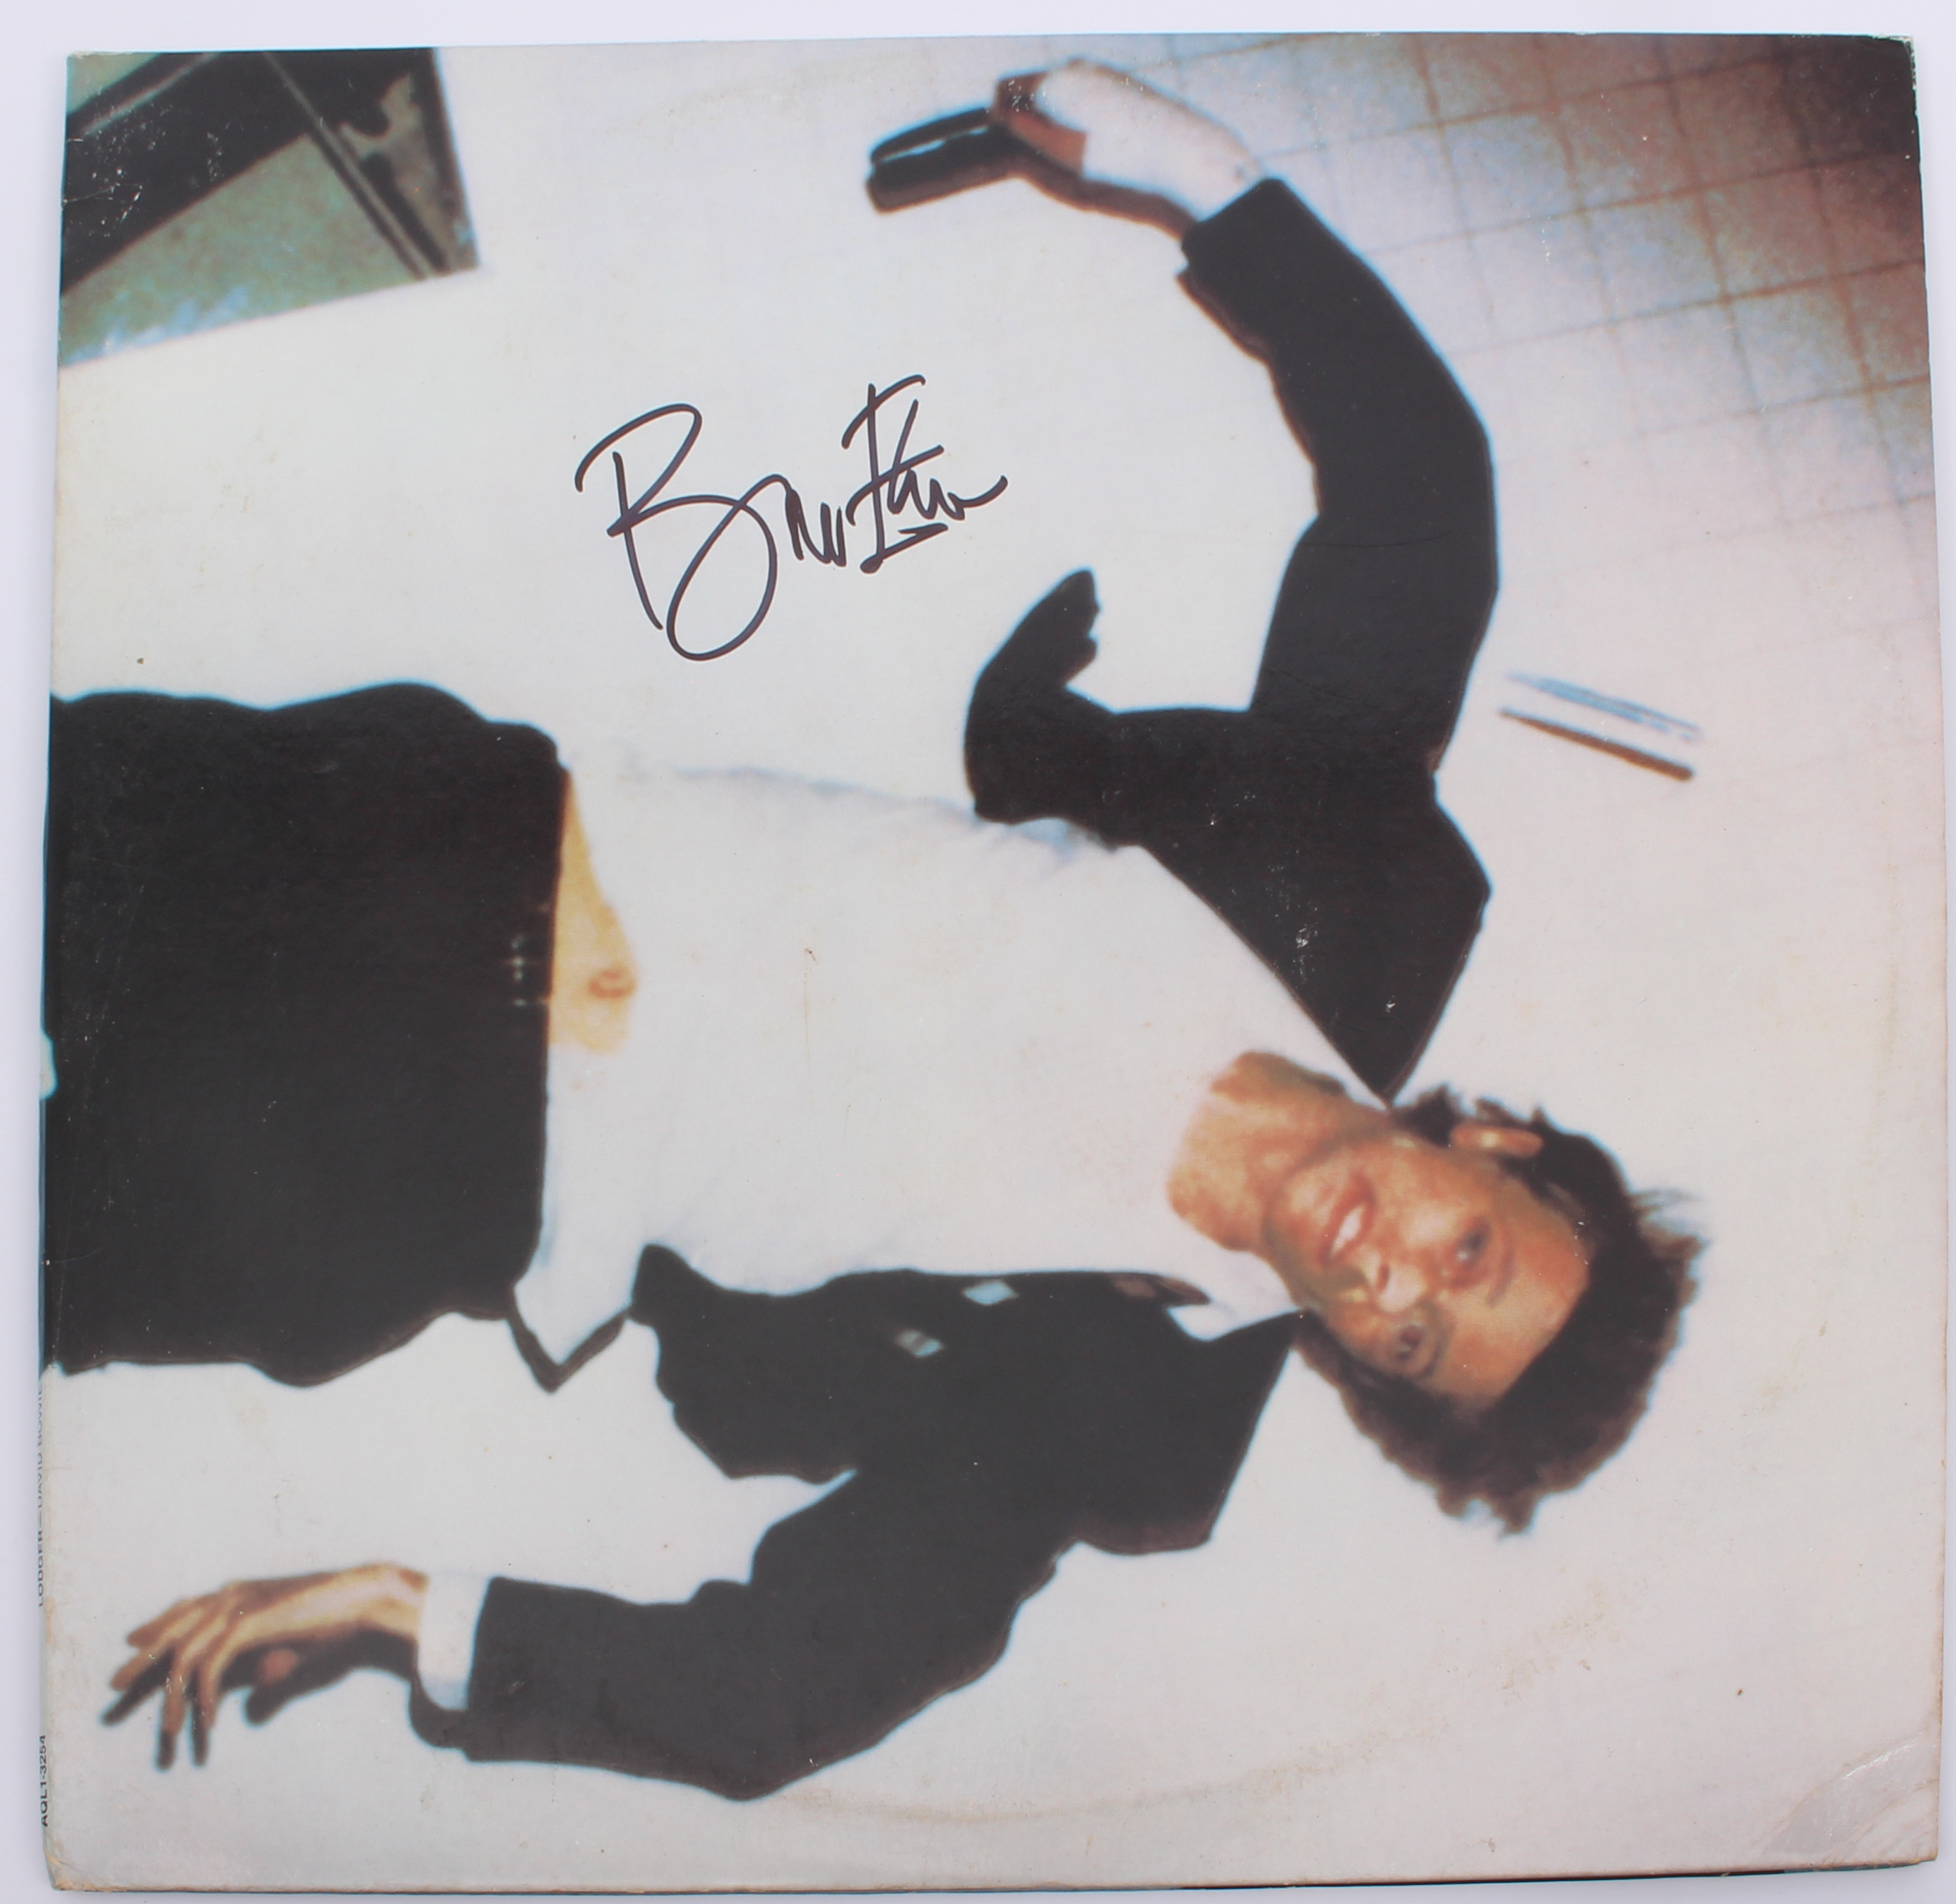 Vinyl / Autographs - David Bowie - Lodger. Original UK album pressing signed on the front by Brian - Image 2 of 5